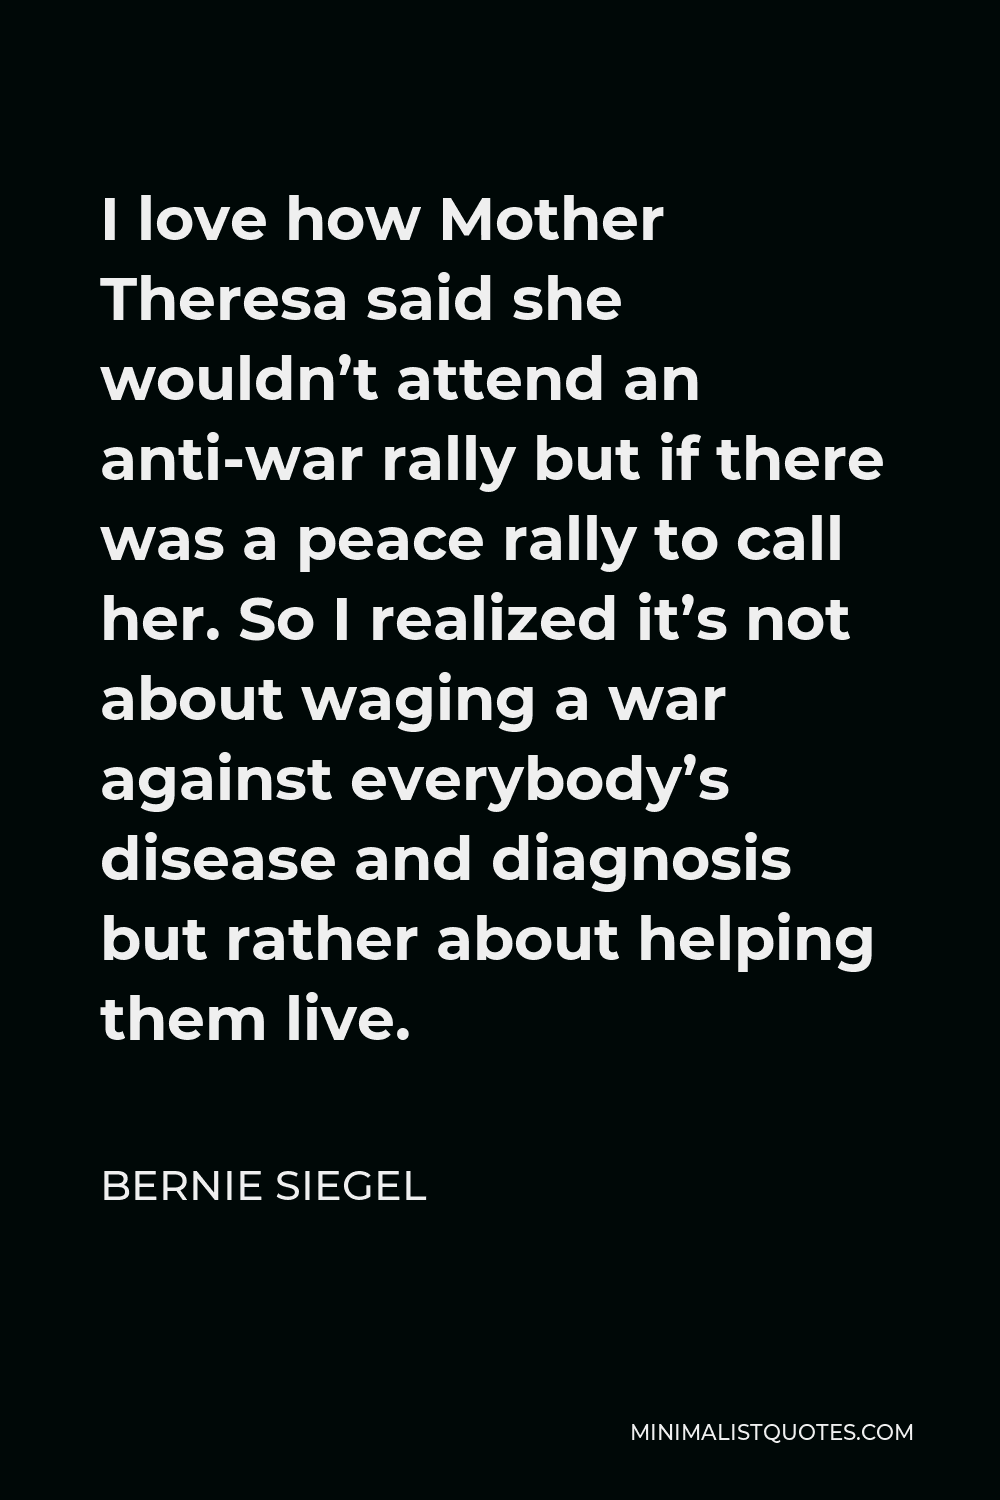 Bernie Siegel Quote - I love how Mother Theresa said she wouldn’t attend an anti-war rally but if there was a peace rally to call her. So I realized it’s not about waging a war against everybody’s disease and diagnosis but rather about helping them live.